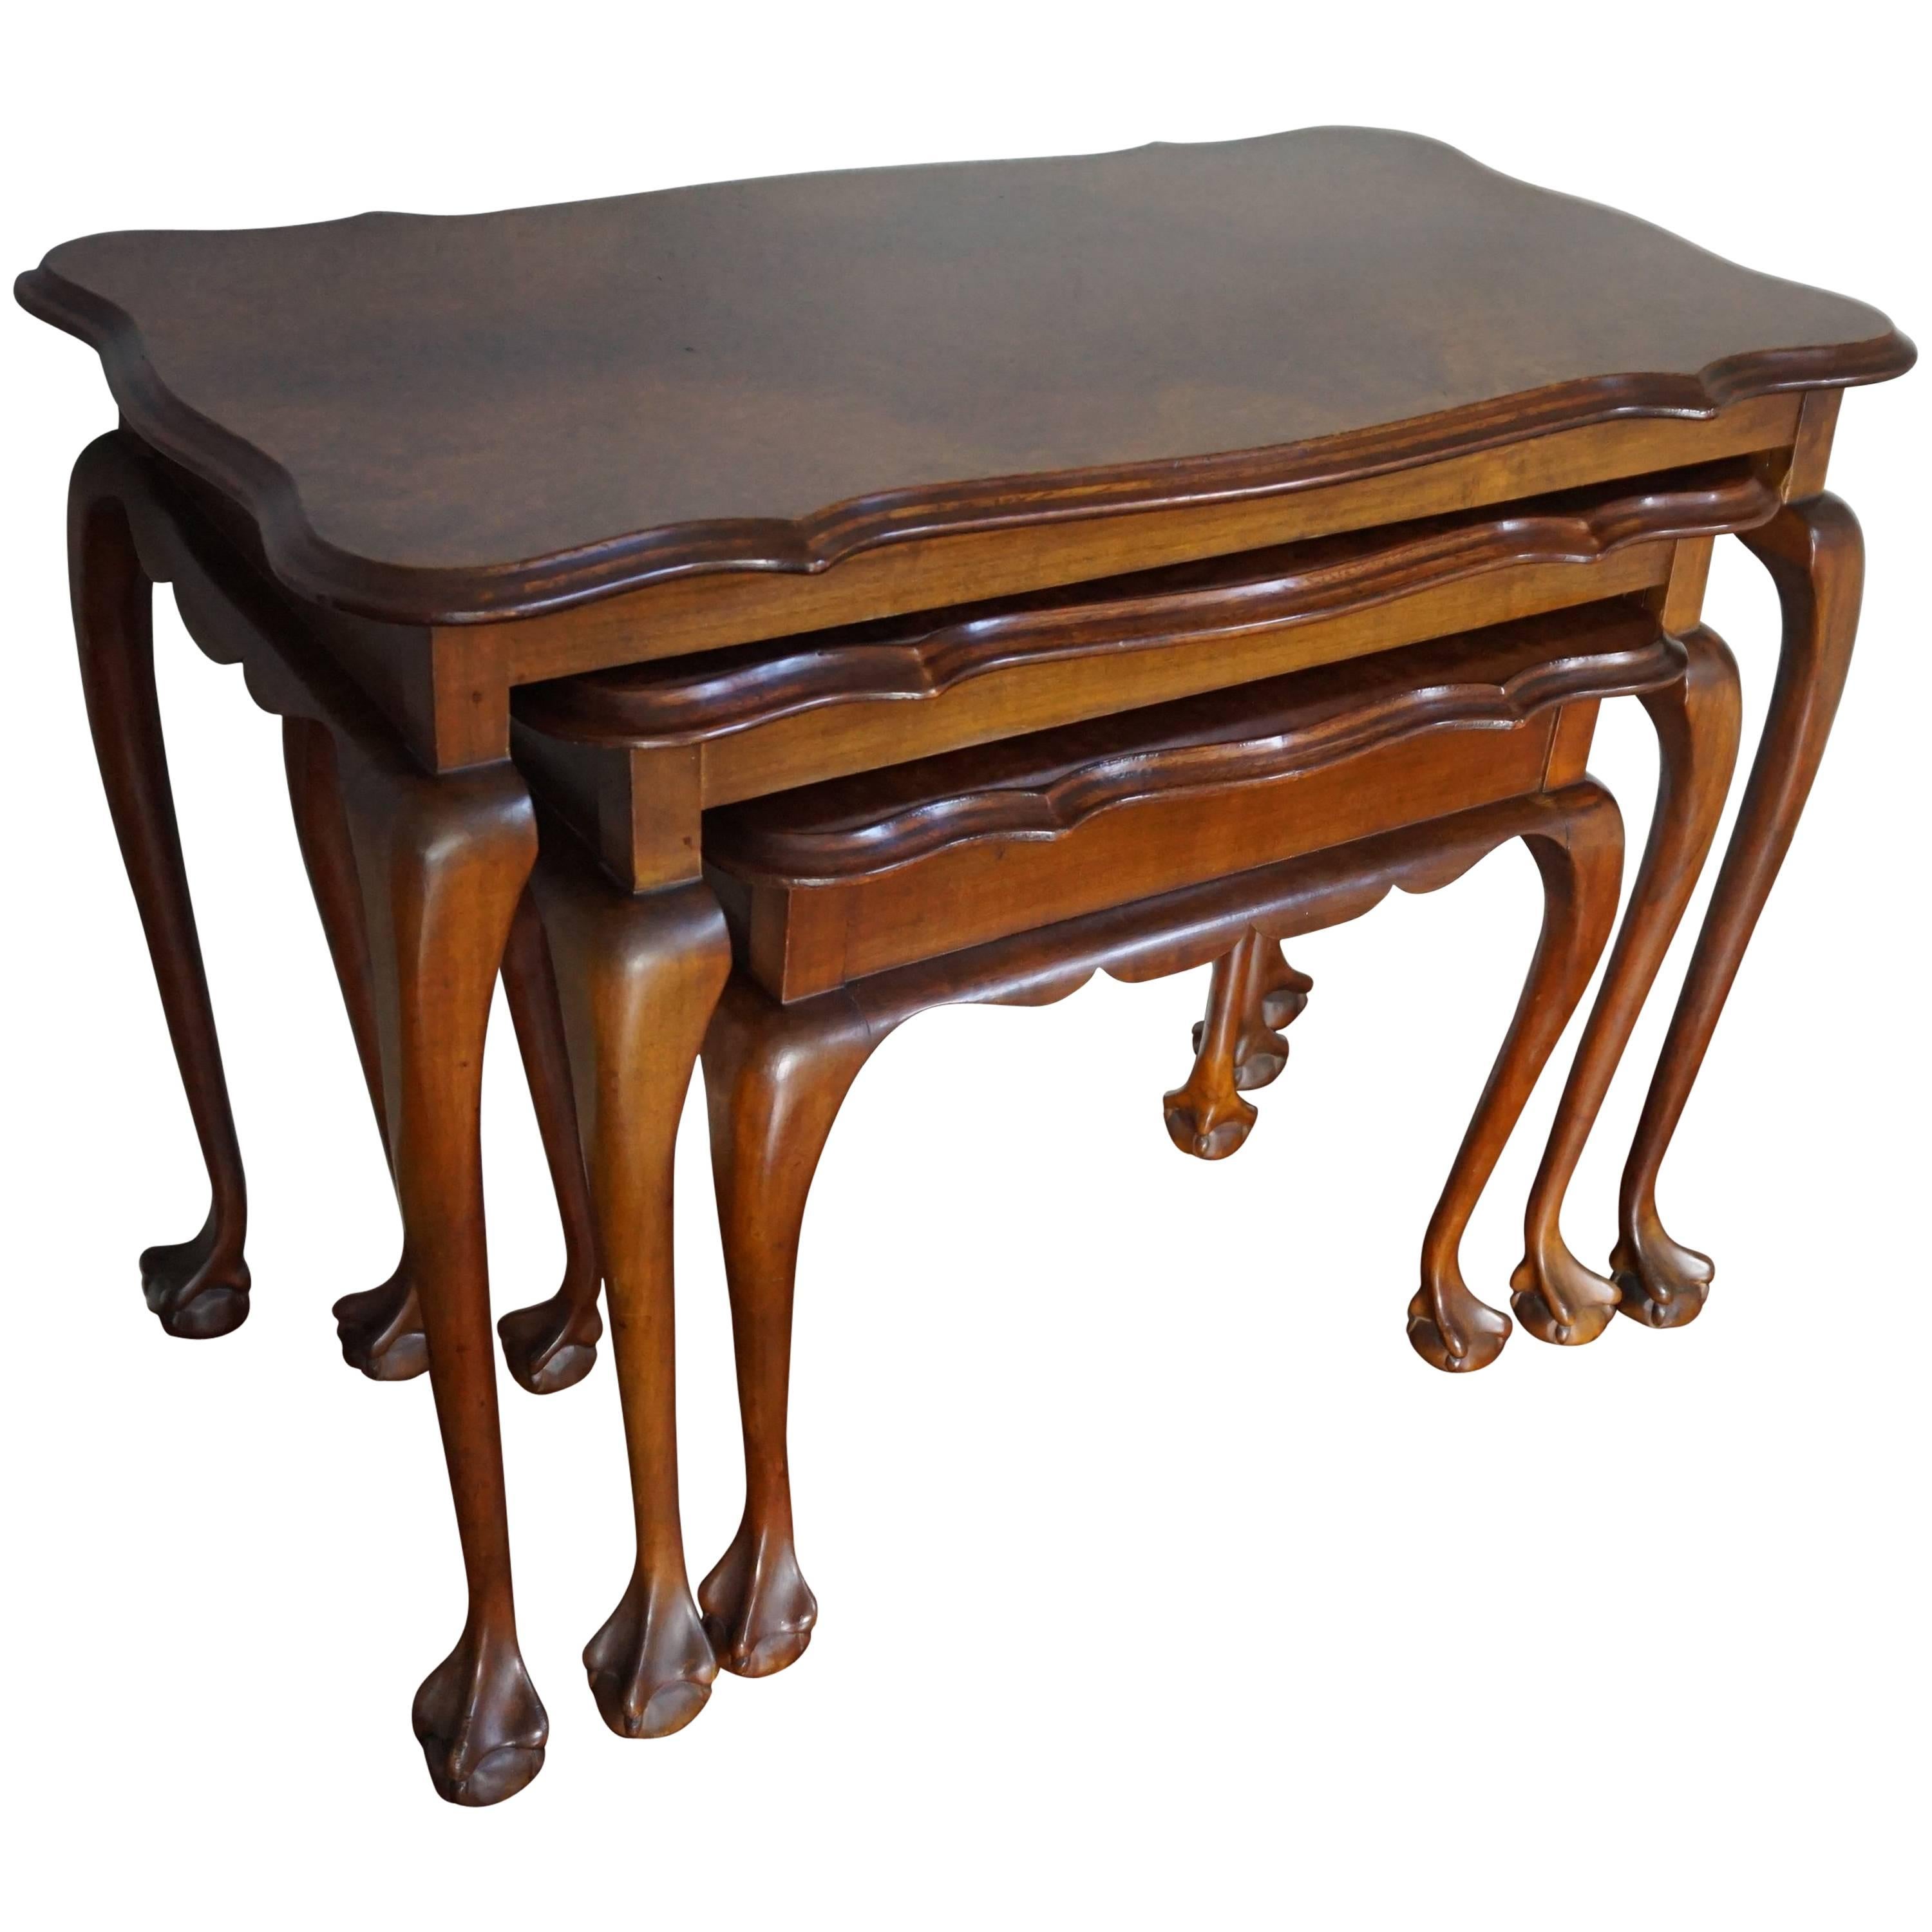 Fine Mid-20th Century Queen Anne Style Nutwood Nest of Tables with Burl Inlay